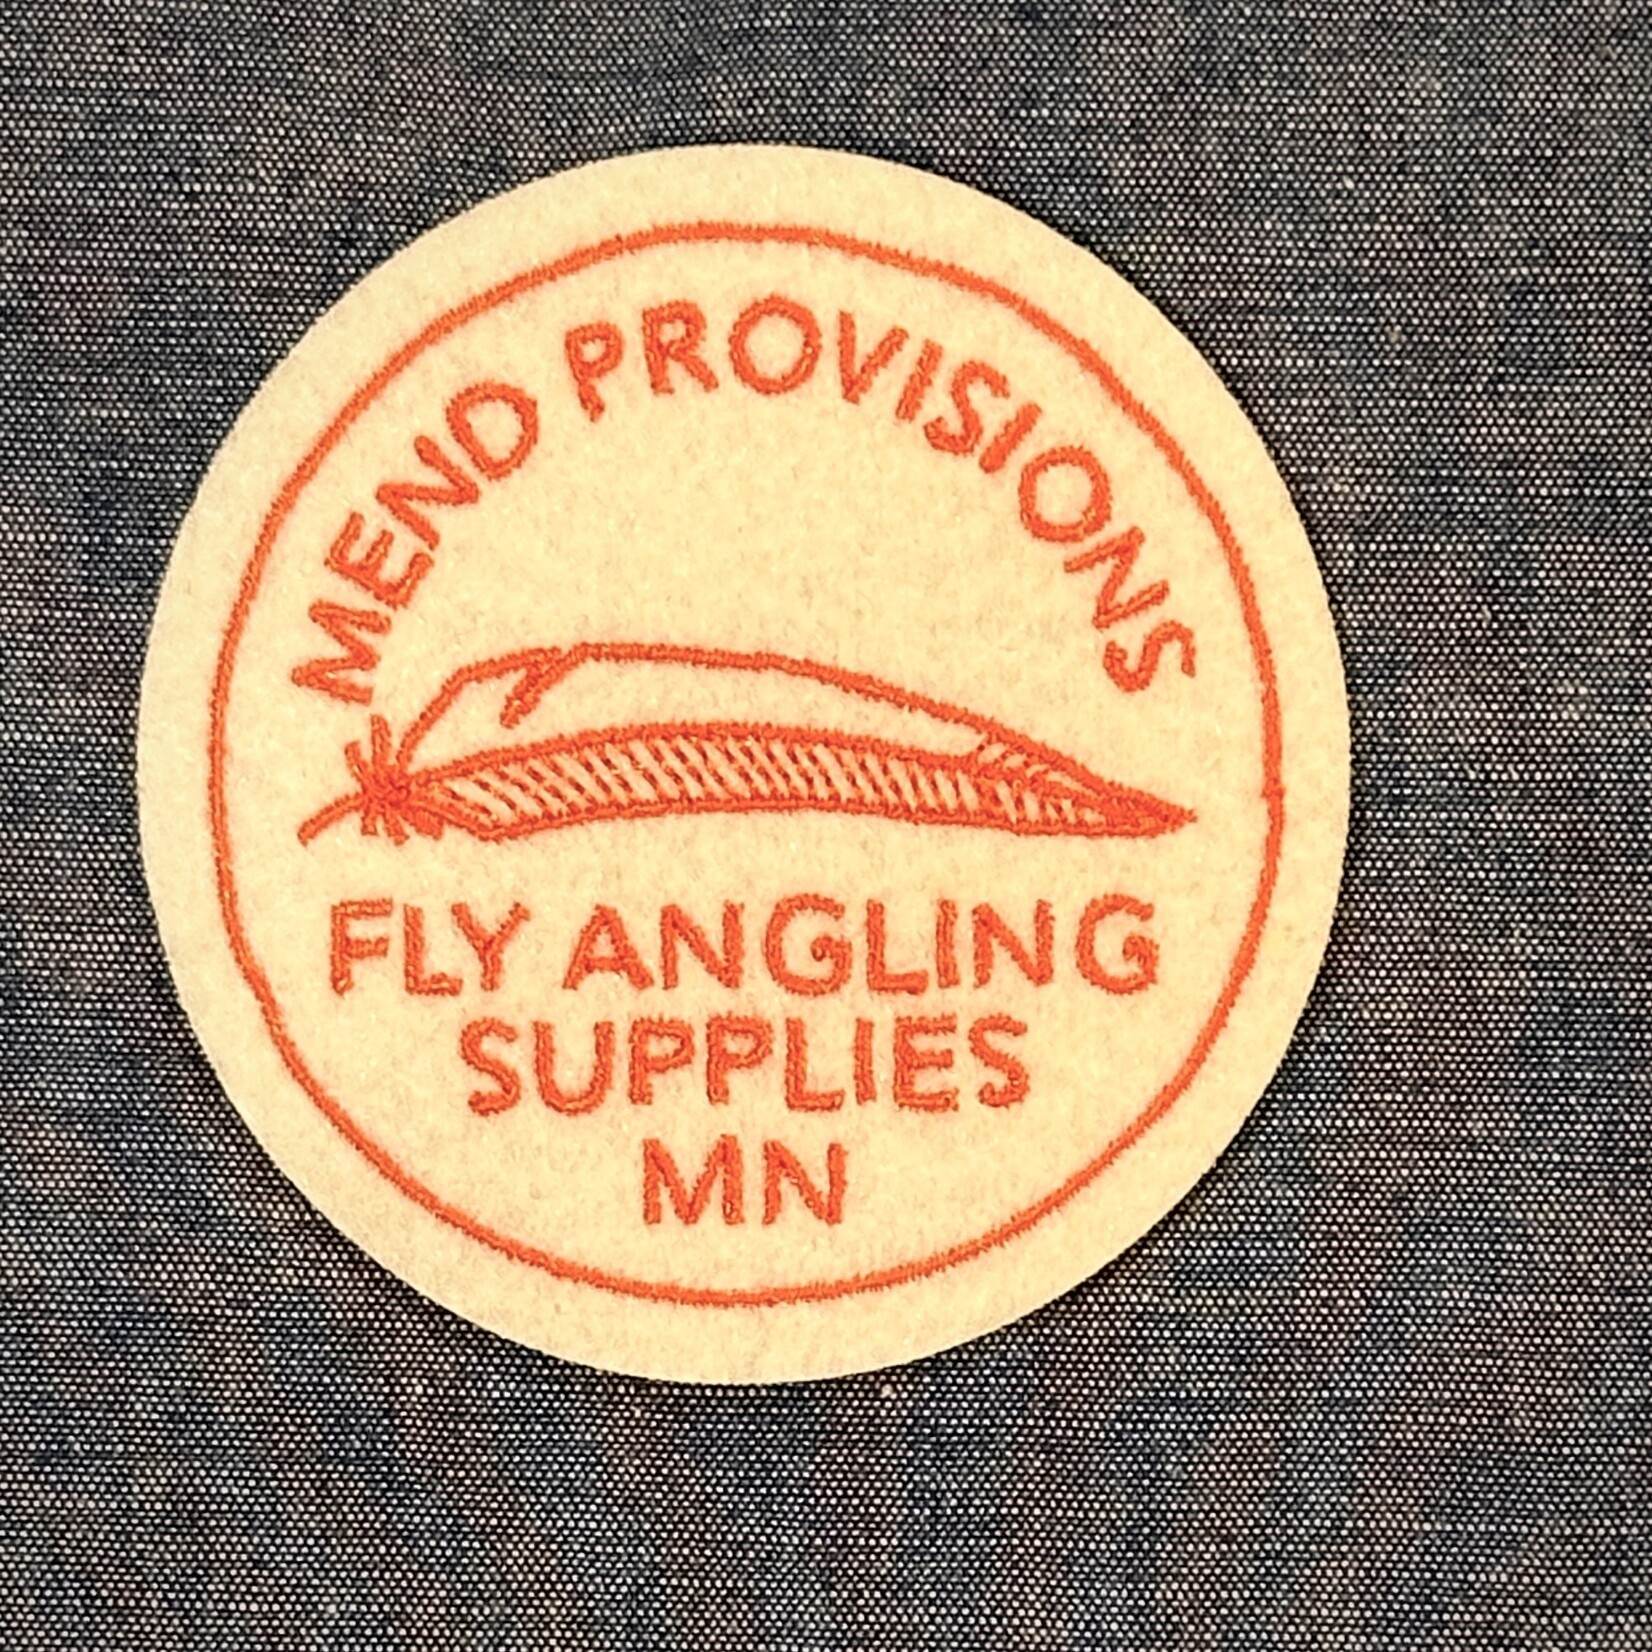 MEND "FLY ANGLING SUPPLIES" FELT PATCH 3"